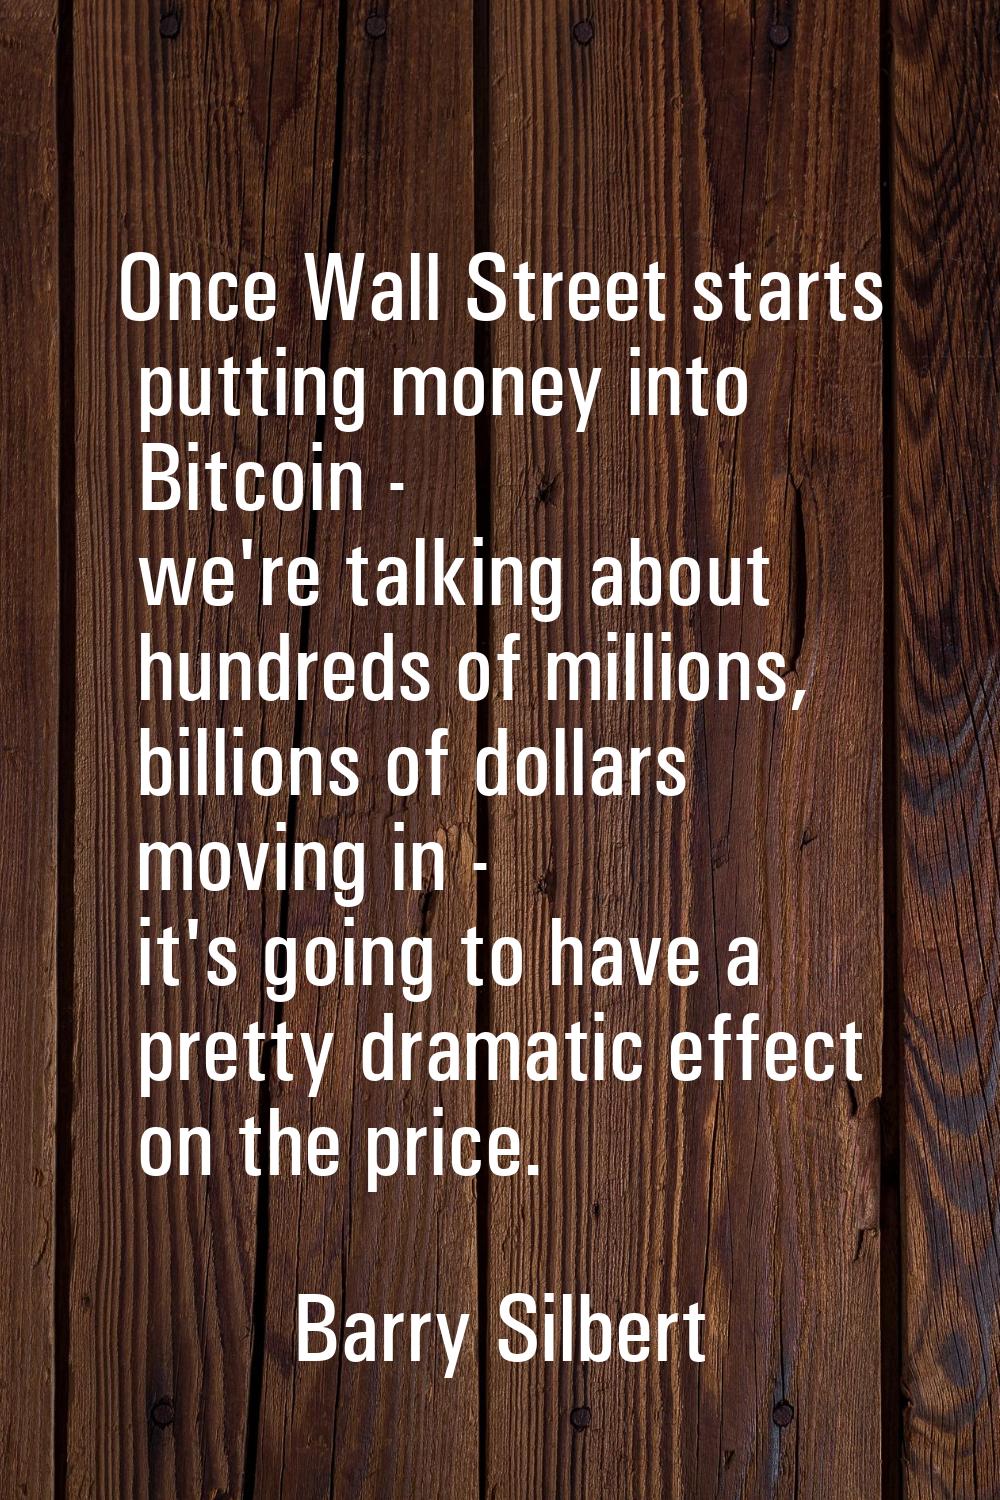 Once Wall Street starts putting money into Bitcoin - we're talking about hundreds of millions, bill